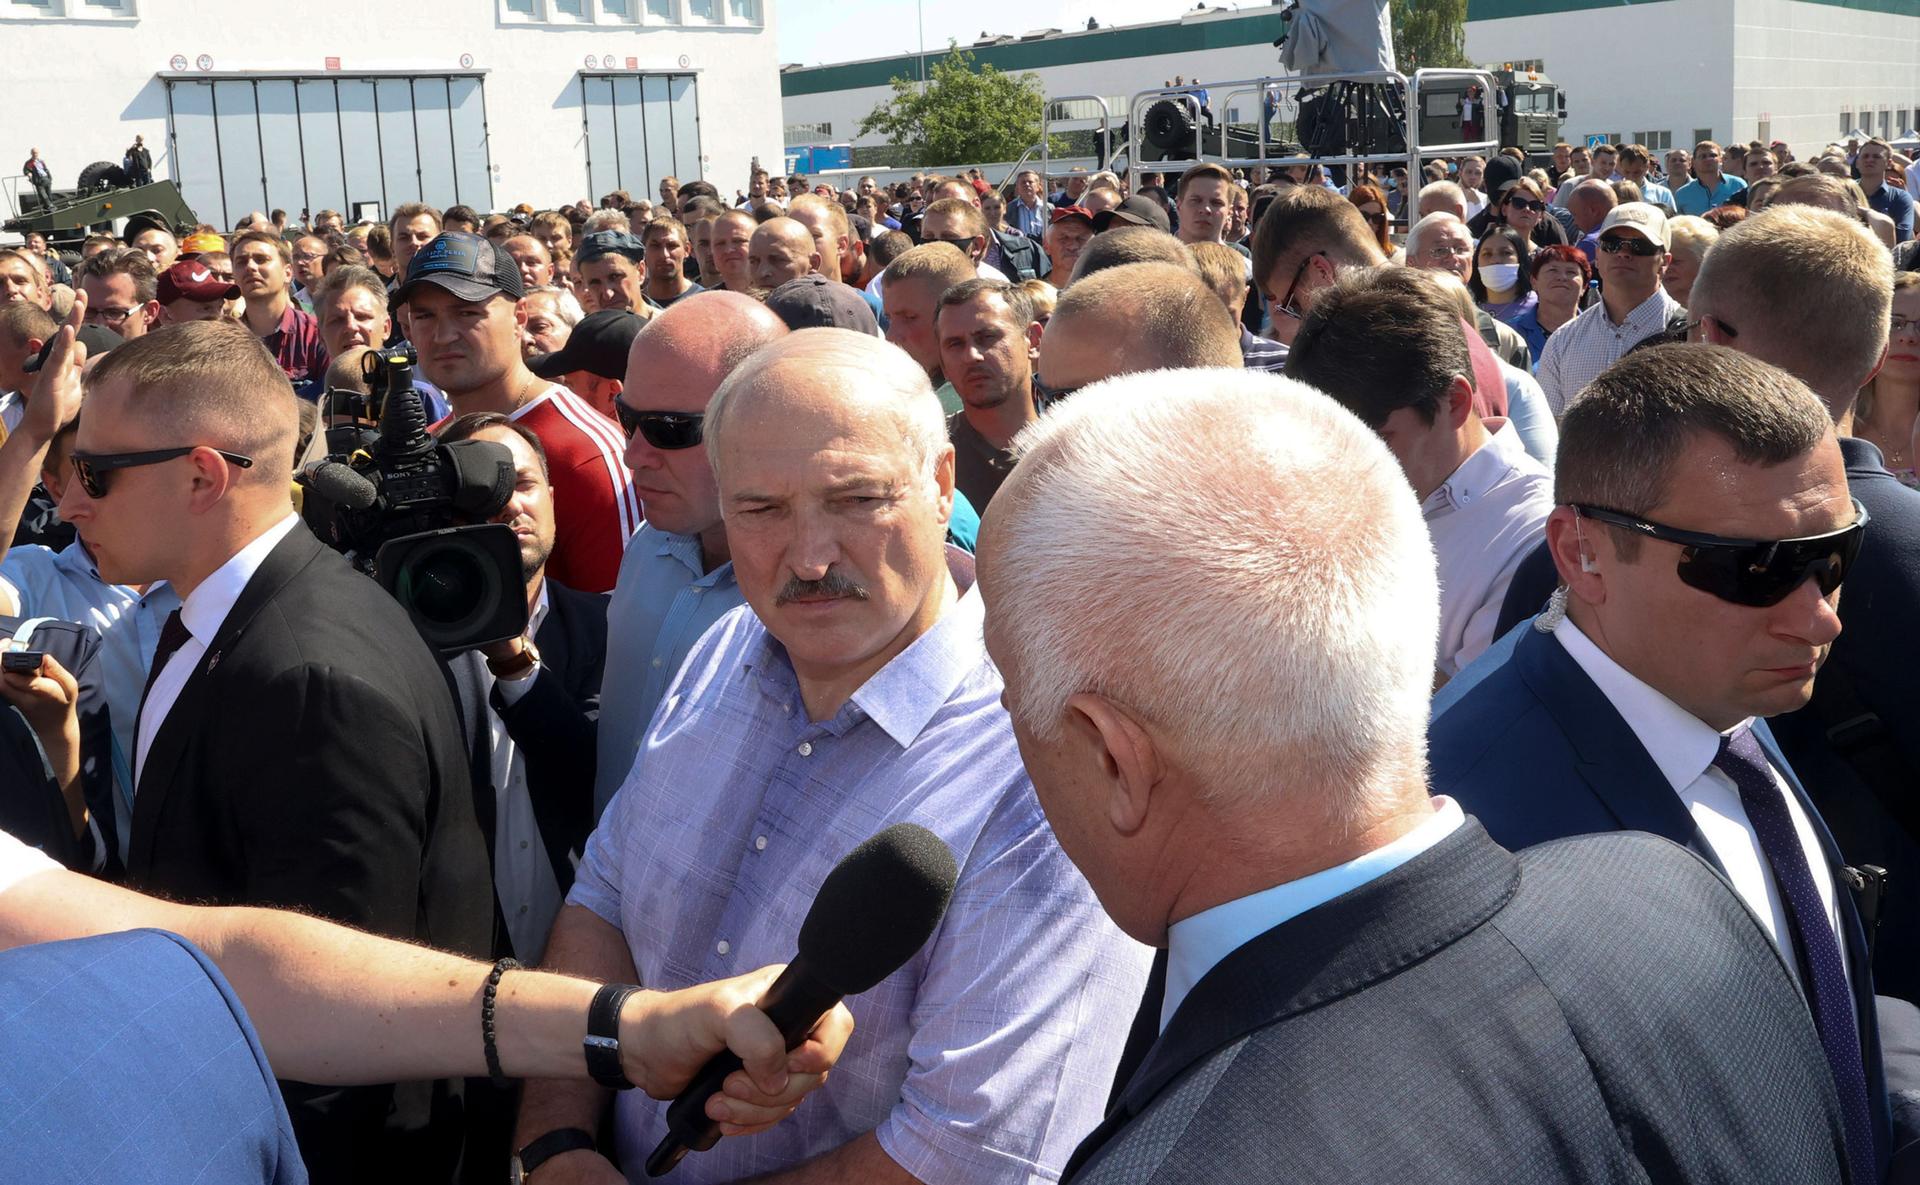 Belarusian President Alexander Lukashenko is shown wearing a blue button down shirt and standing in a large crowd with bodyguards surrounding him.